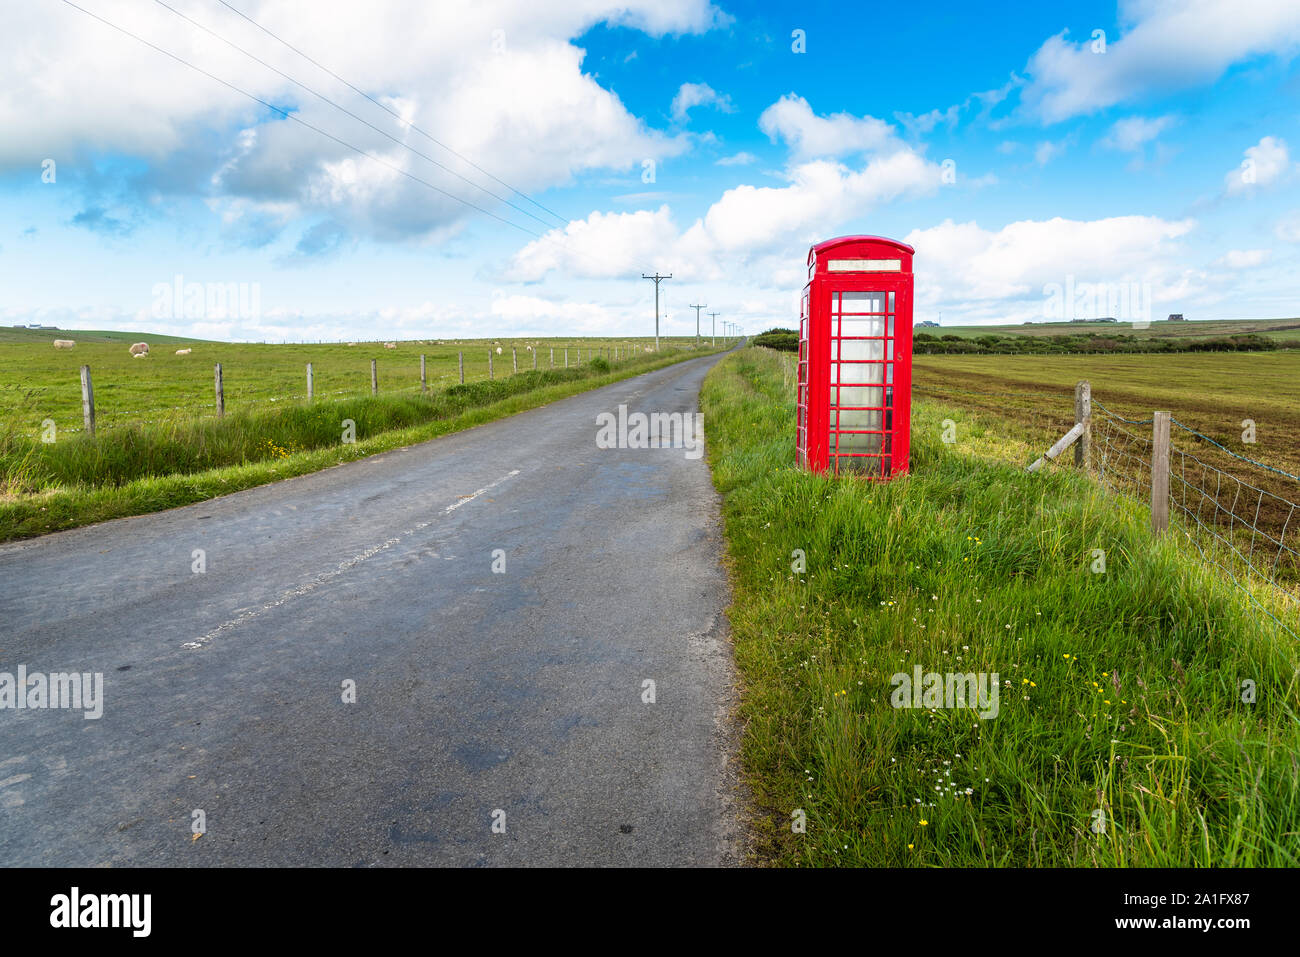 Lonely British telephone booths on a country road on a clear spring day Stock Photo